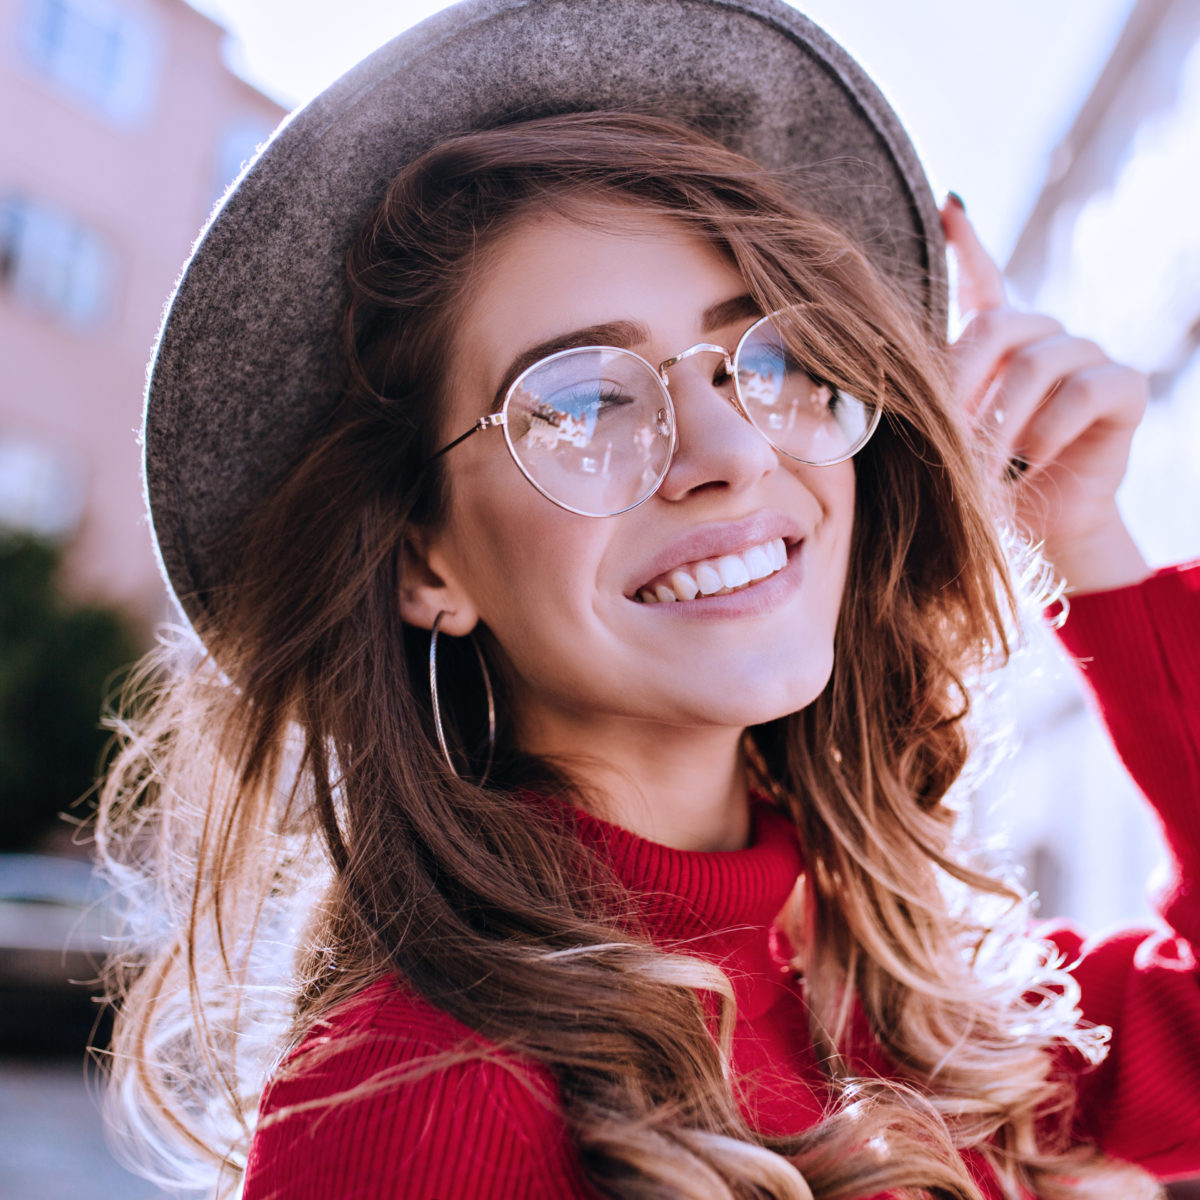 Girl wearing red sweater and glasses smiling at the camera.